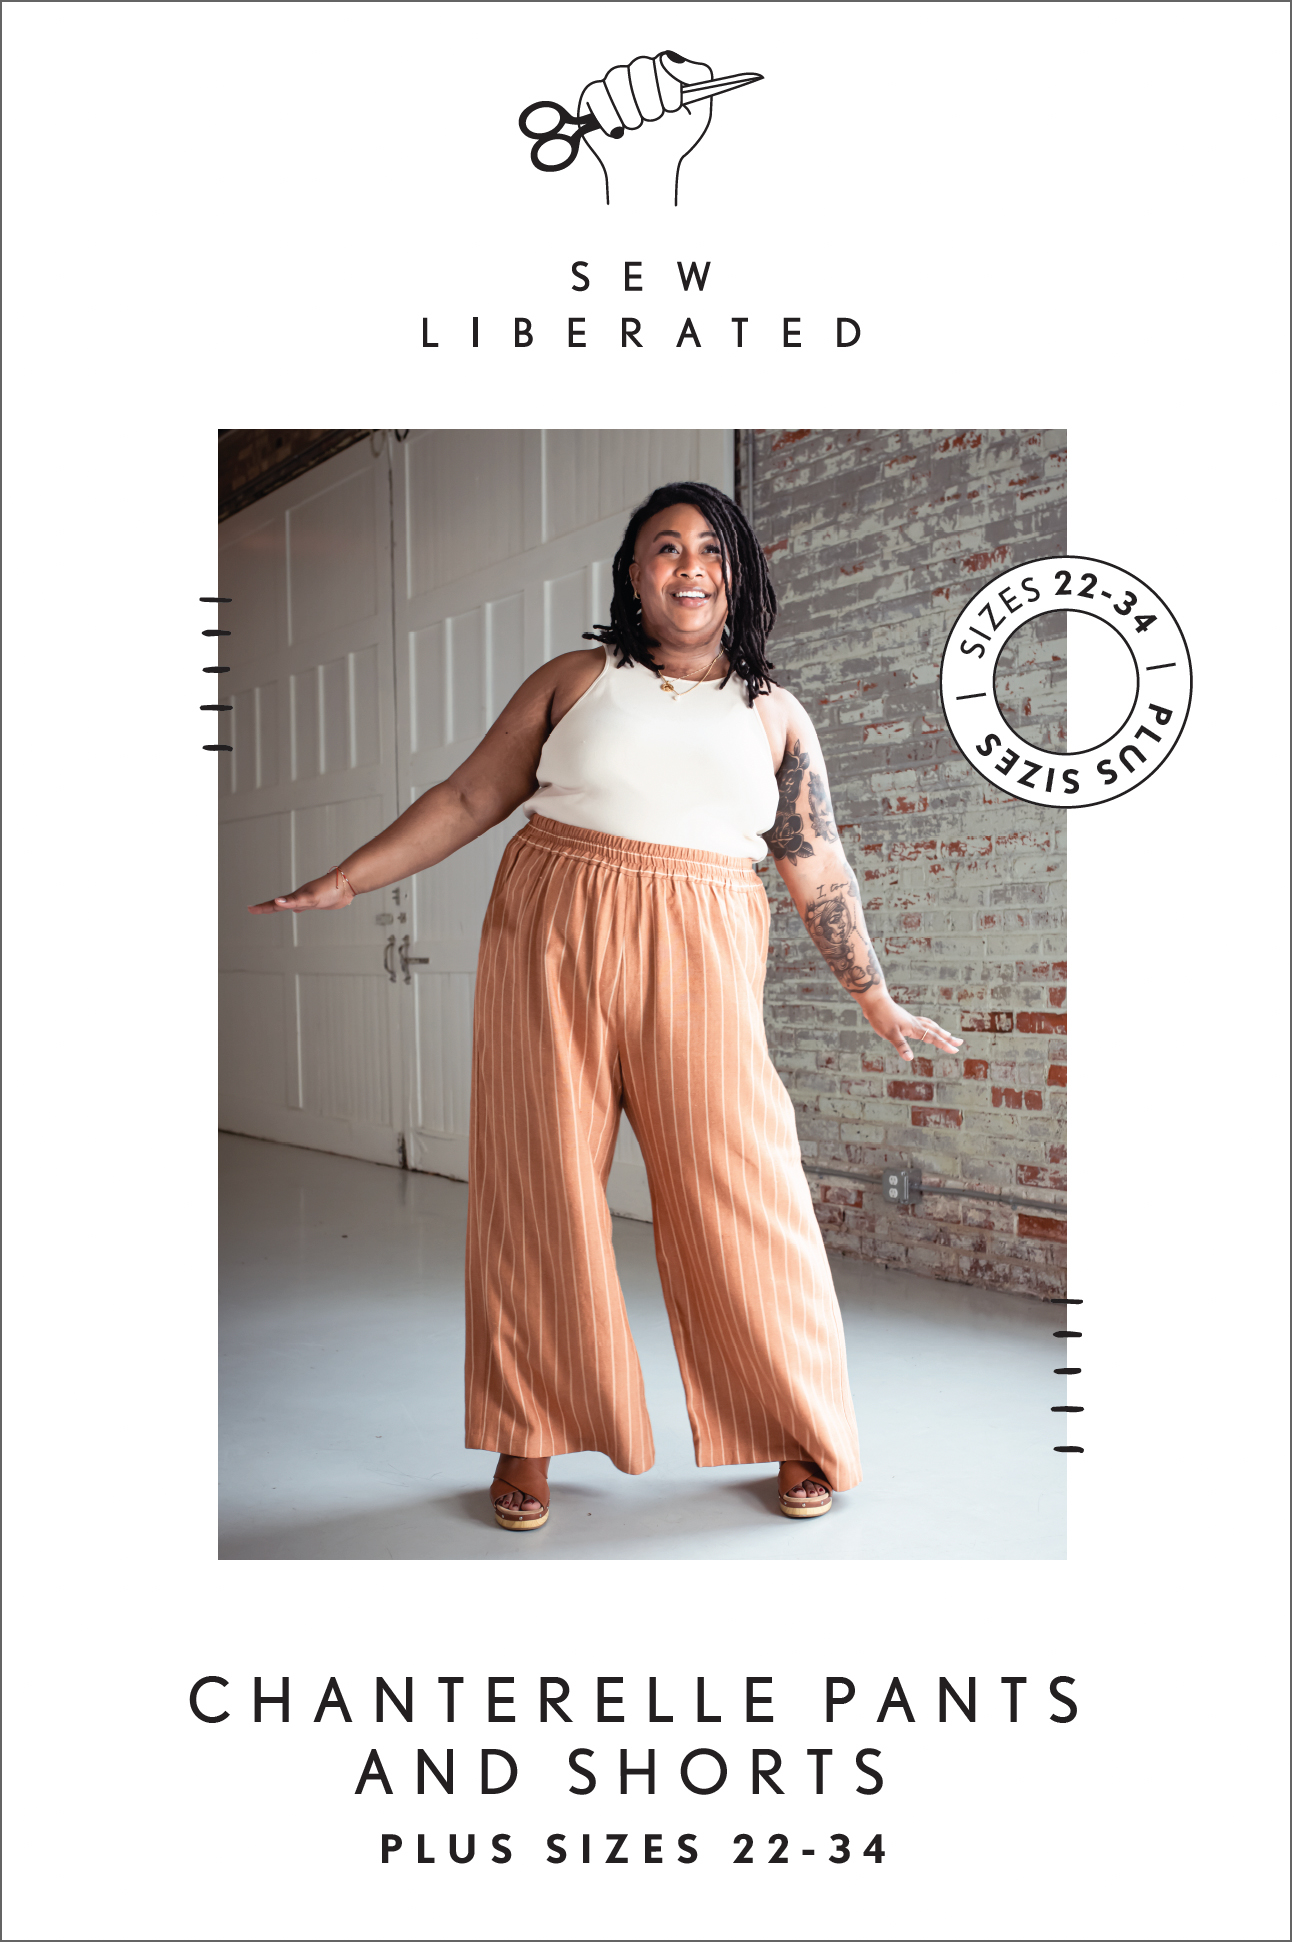 Chanterelle Pants And Shorts Sizes 22-34 Sewing Pattern By Sew Liberated (Due May)